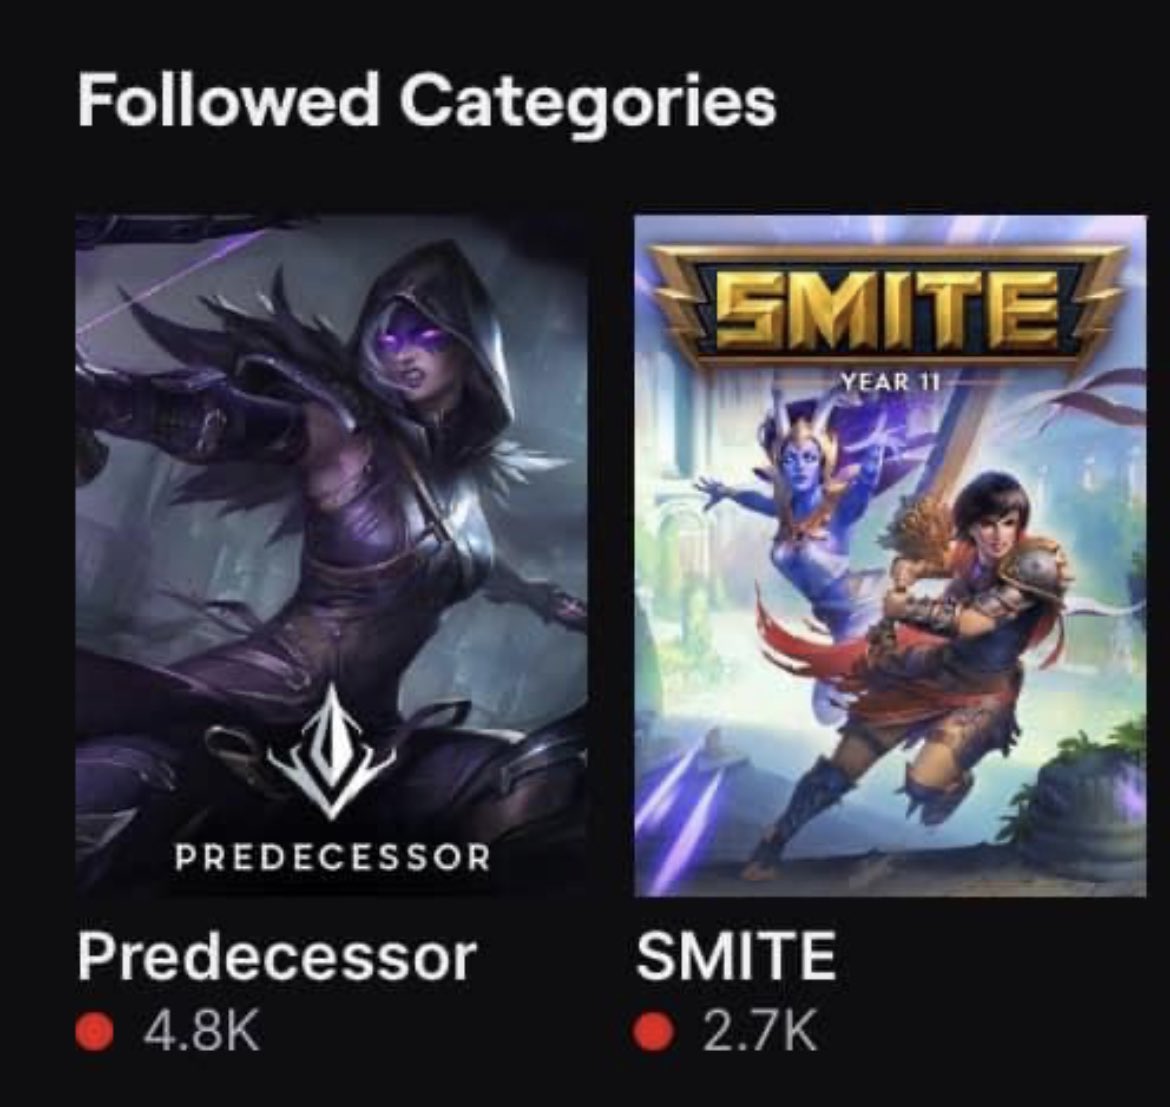 Is @SMITEGame cooked?